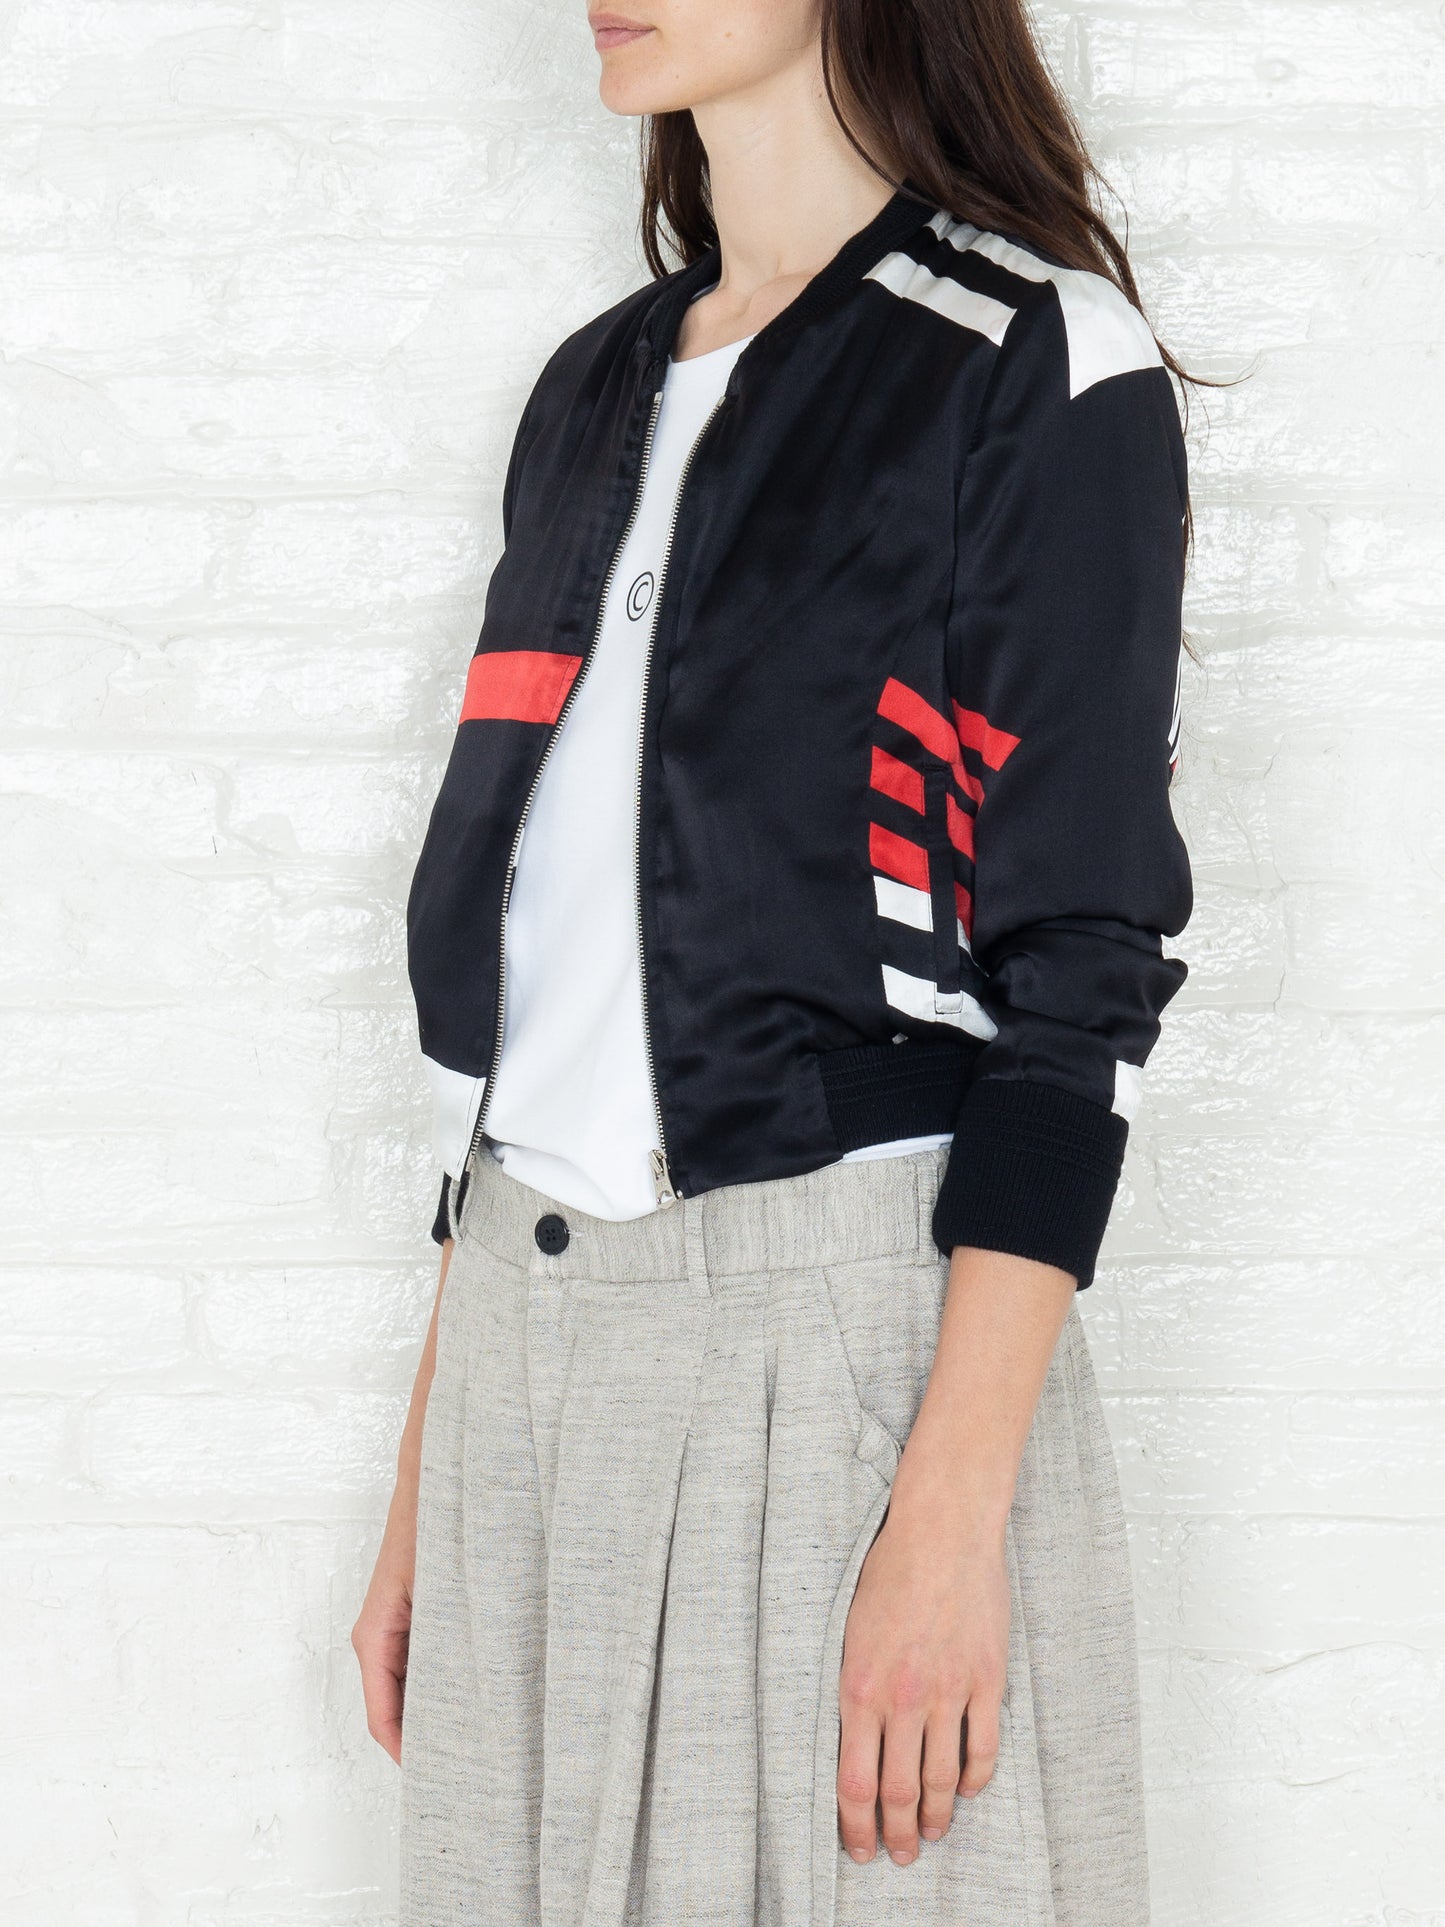 "The Classic Bomber" 3/4 in Black White and Red